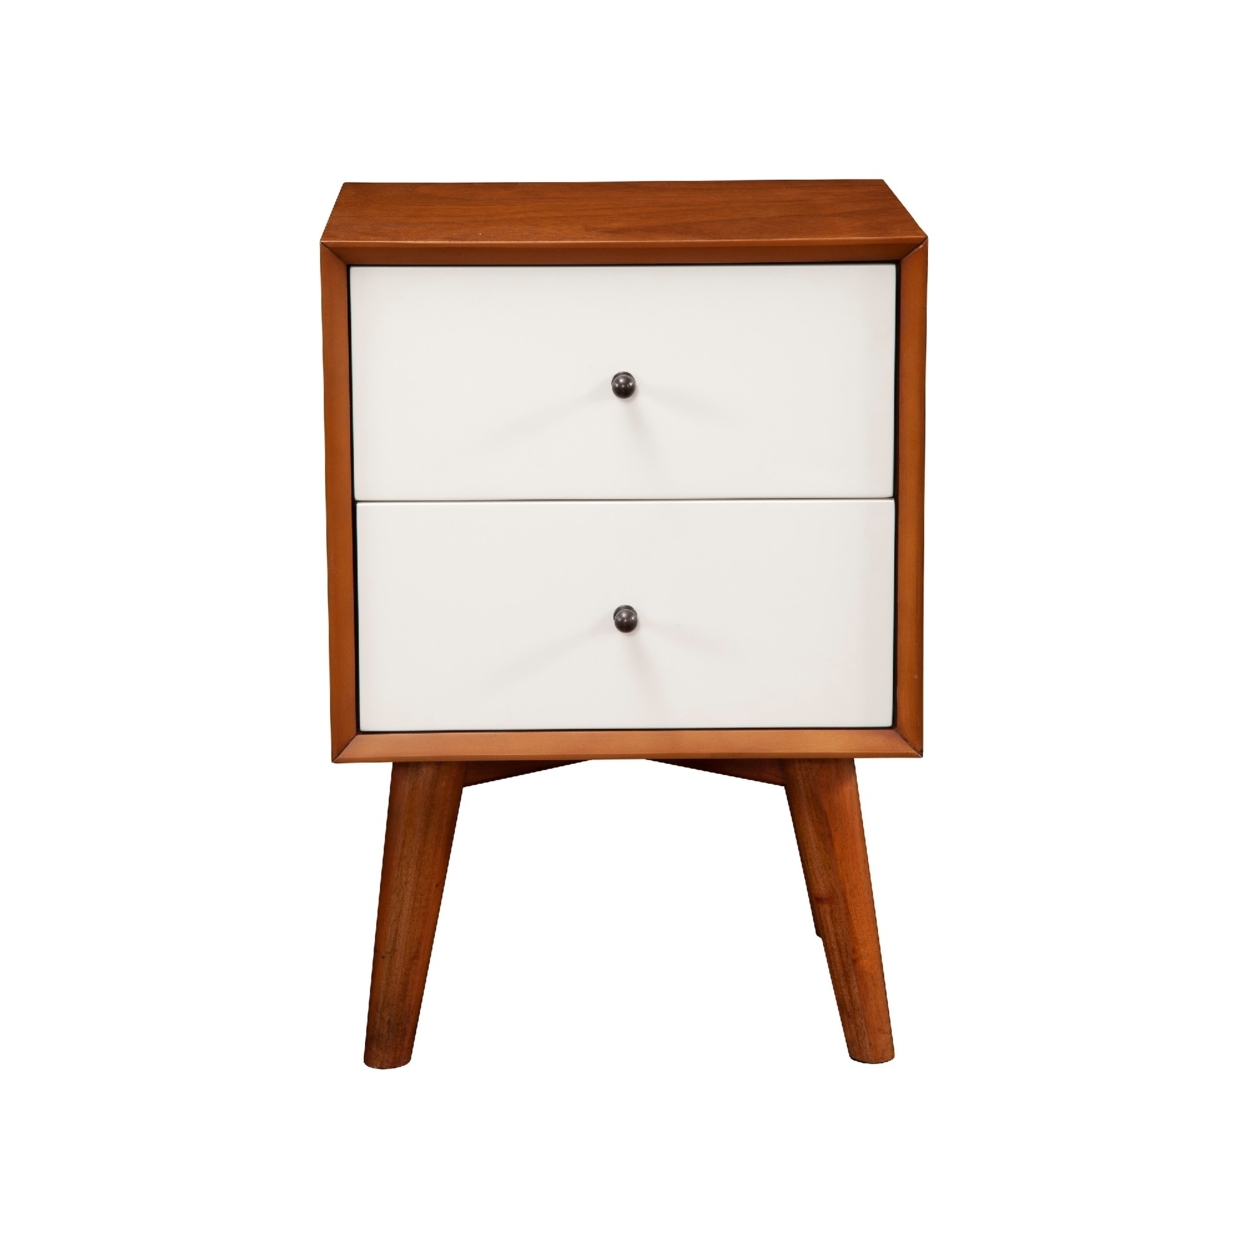 Stylish Wooden Nightstand With Two Drawers And Flared Legs, Brown And White- Saltoro Sherpi